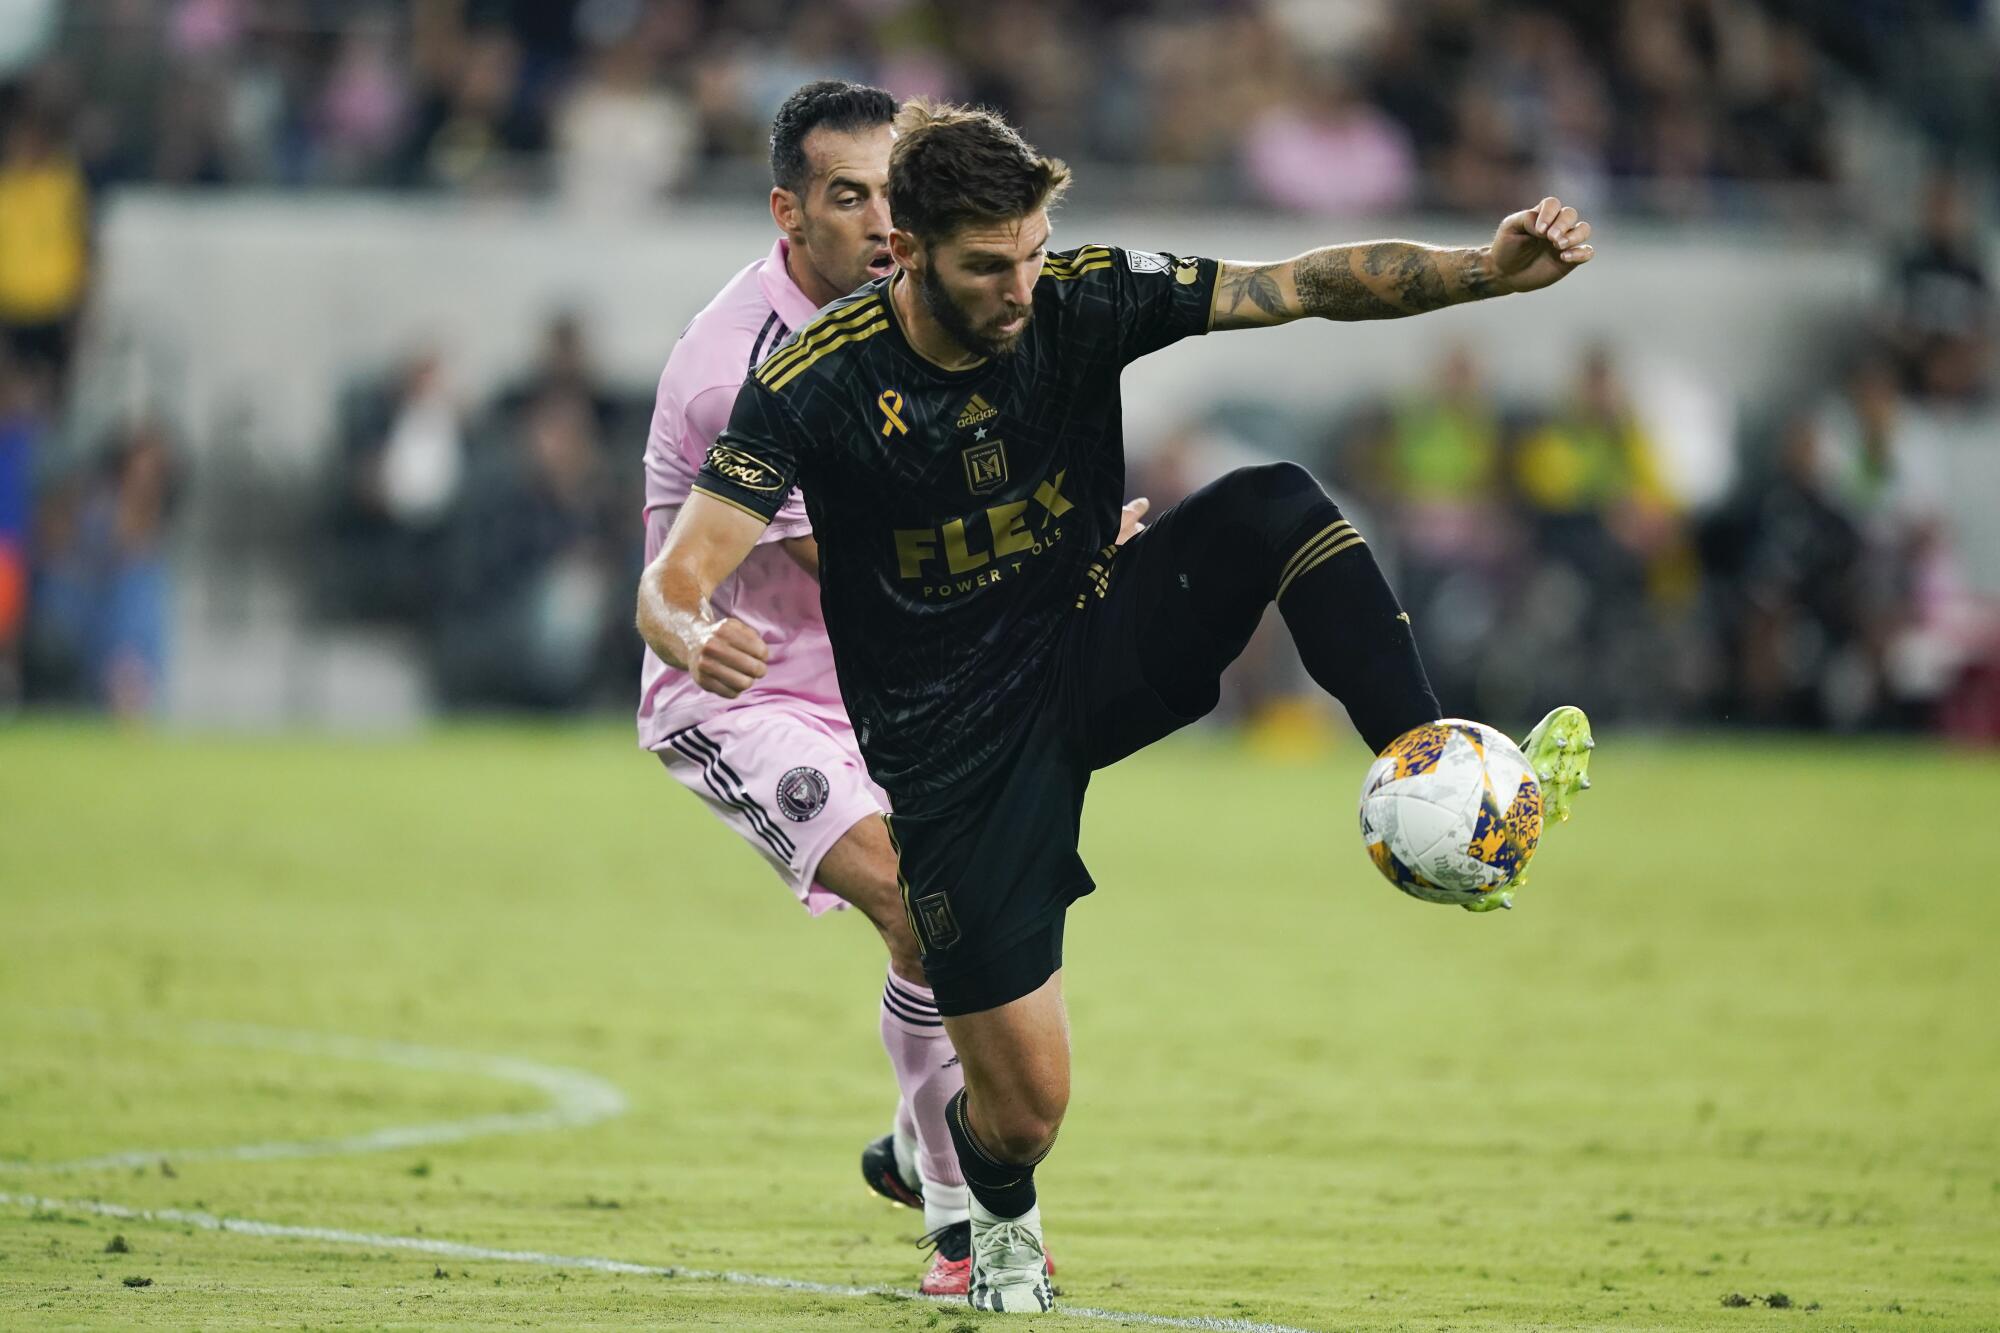 LAFC midfielder Ryan Hollingshead controls the ball during a match against Inter Miami on Sept. 3.